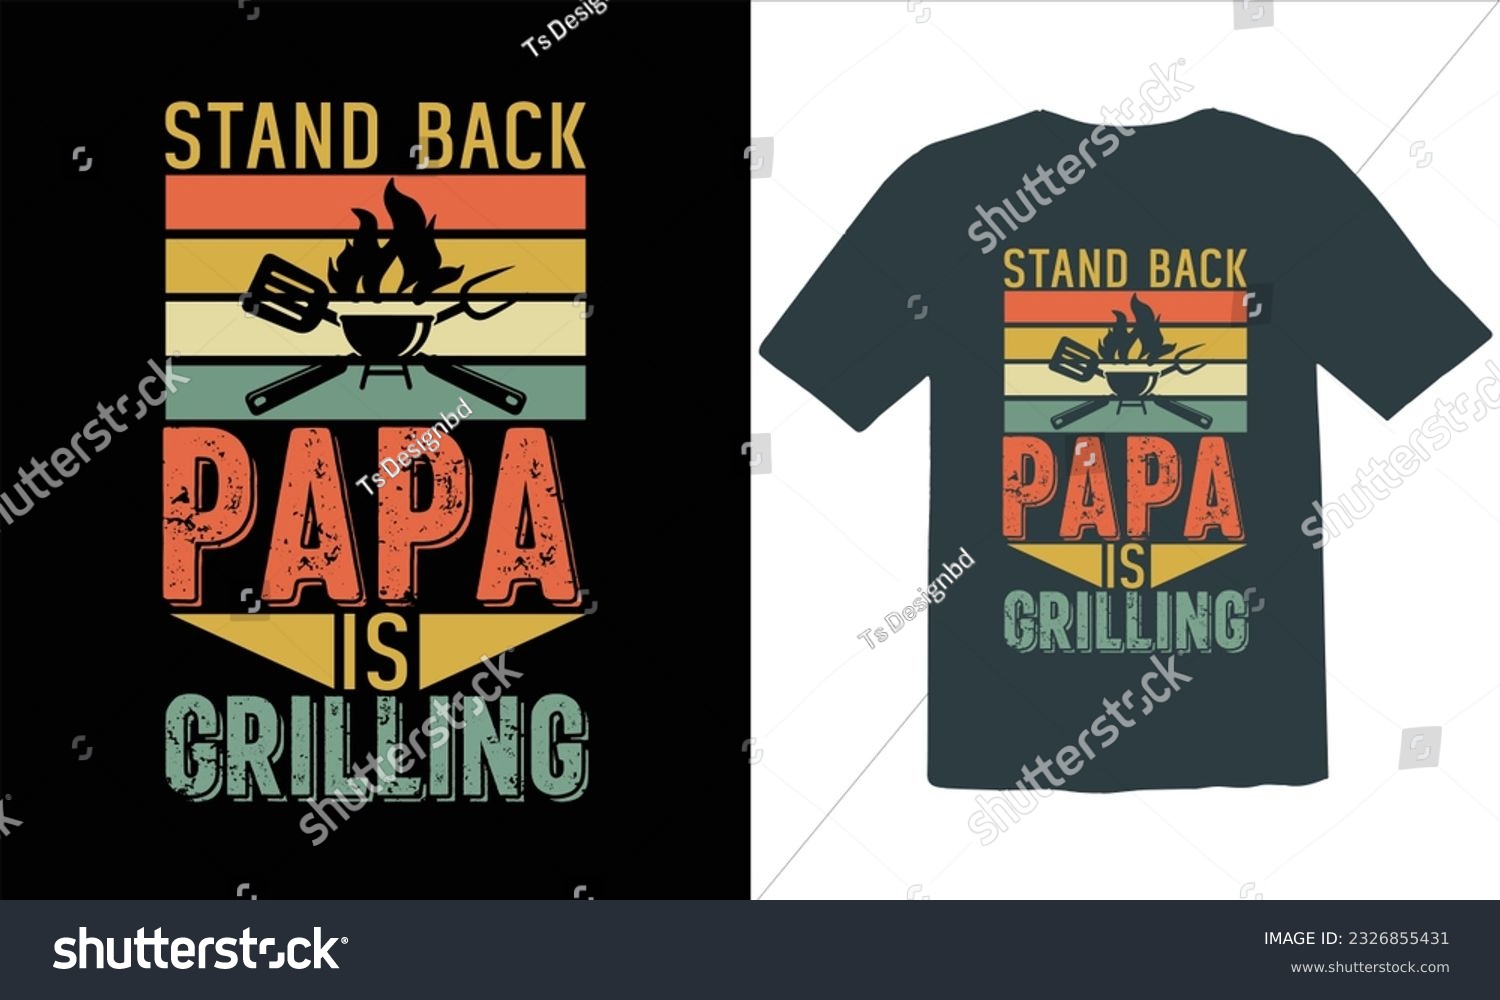 SVG of Stand Back Papa Is Grilling  T Shirt Design,BBQ T-shirt design,typography BBQ shirts design,BBQ Grilling shirts design vectors,Barbeque t-shirt,Typography vector T-shirt design,Funny BBQ Shirt svg